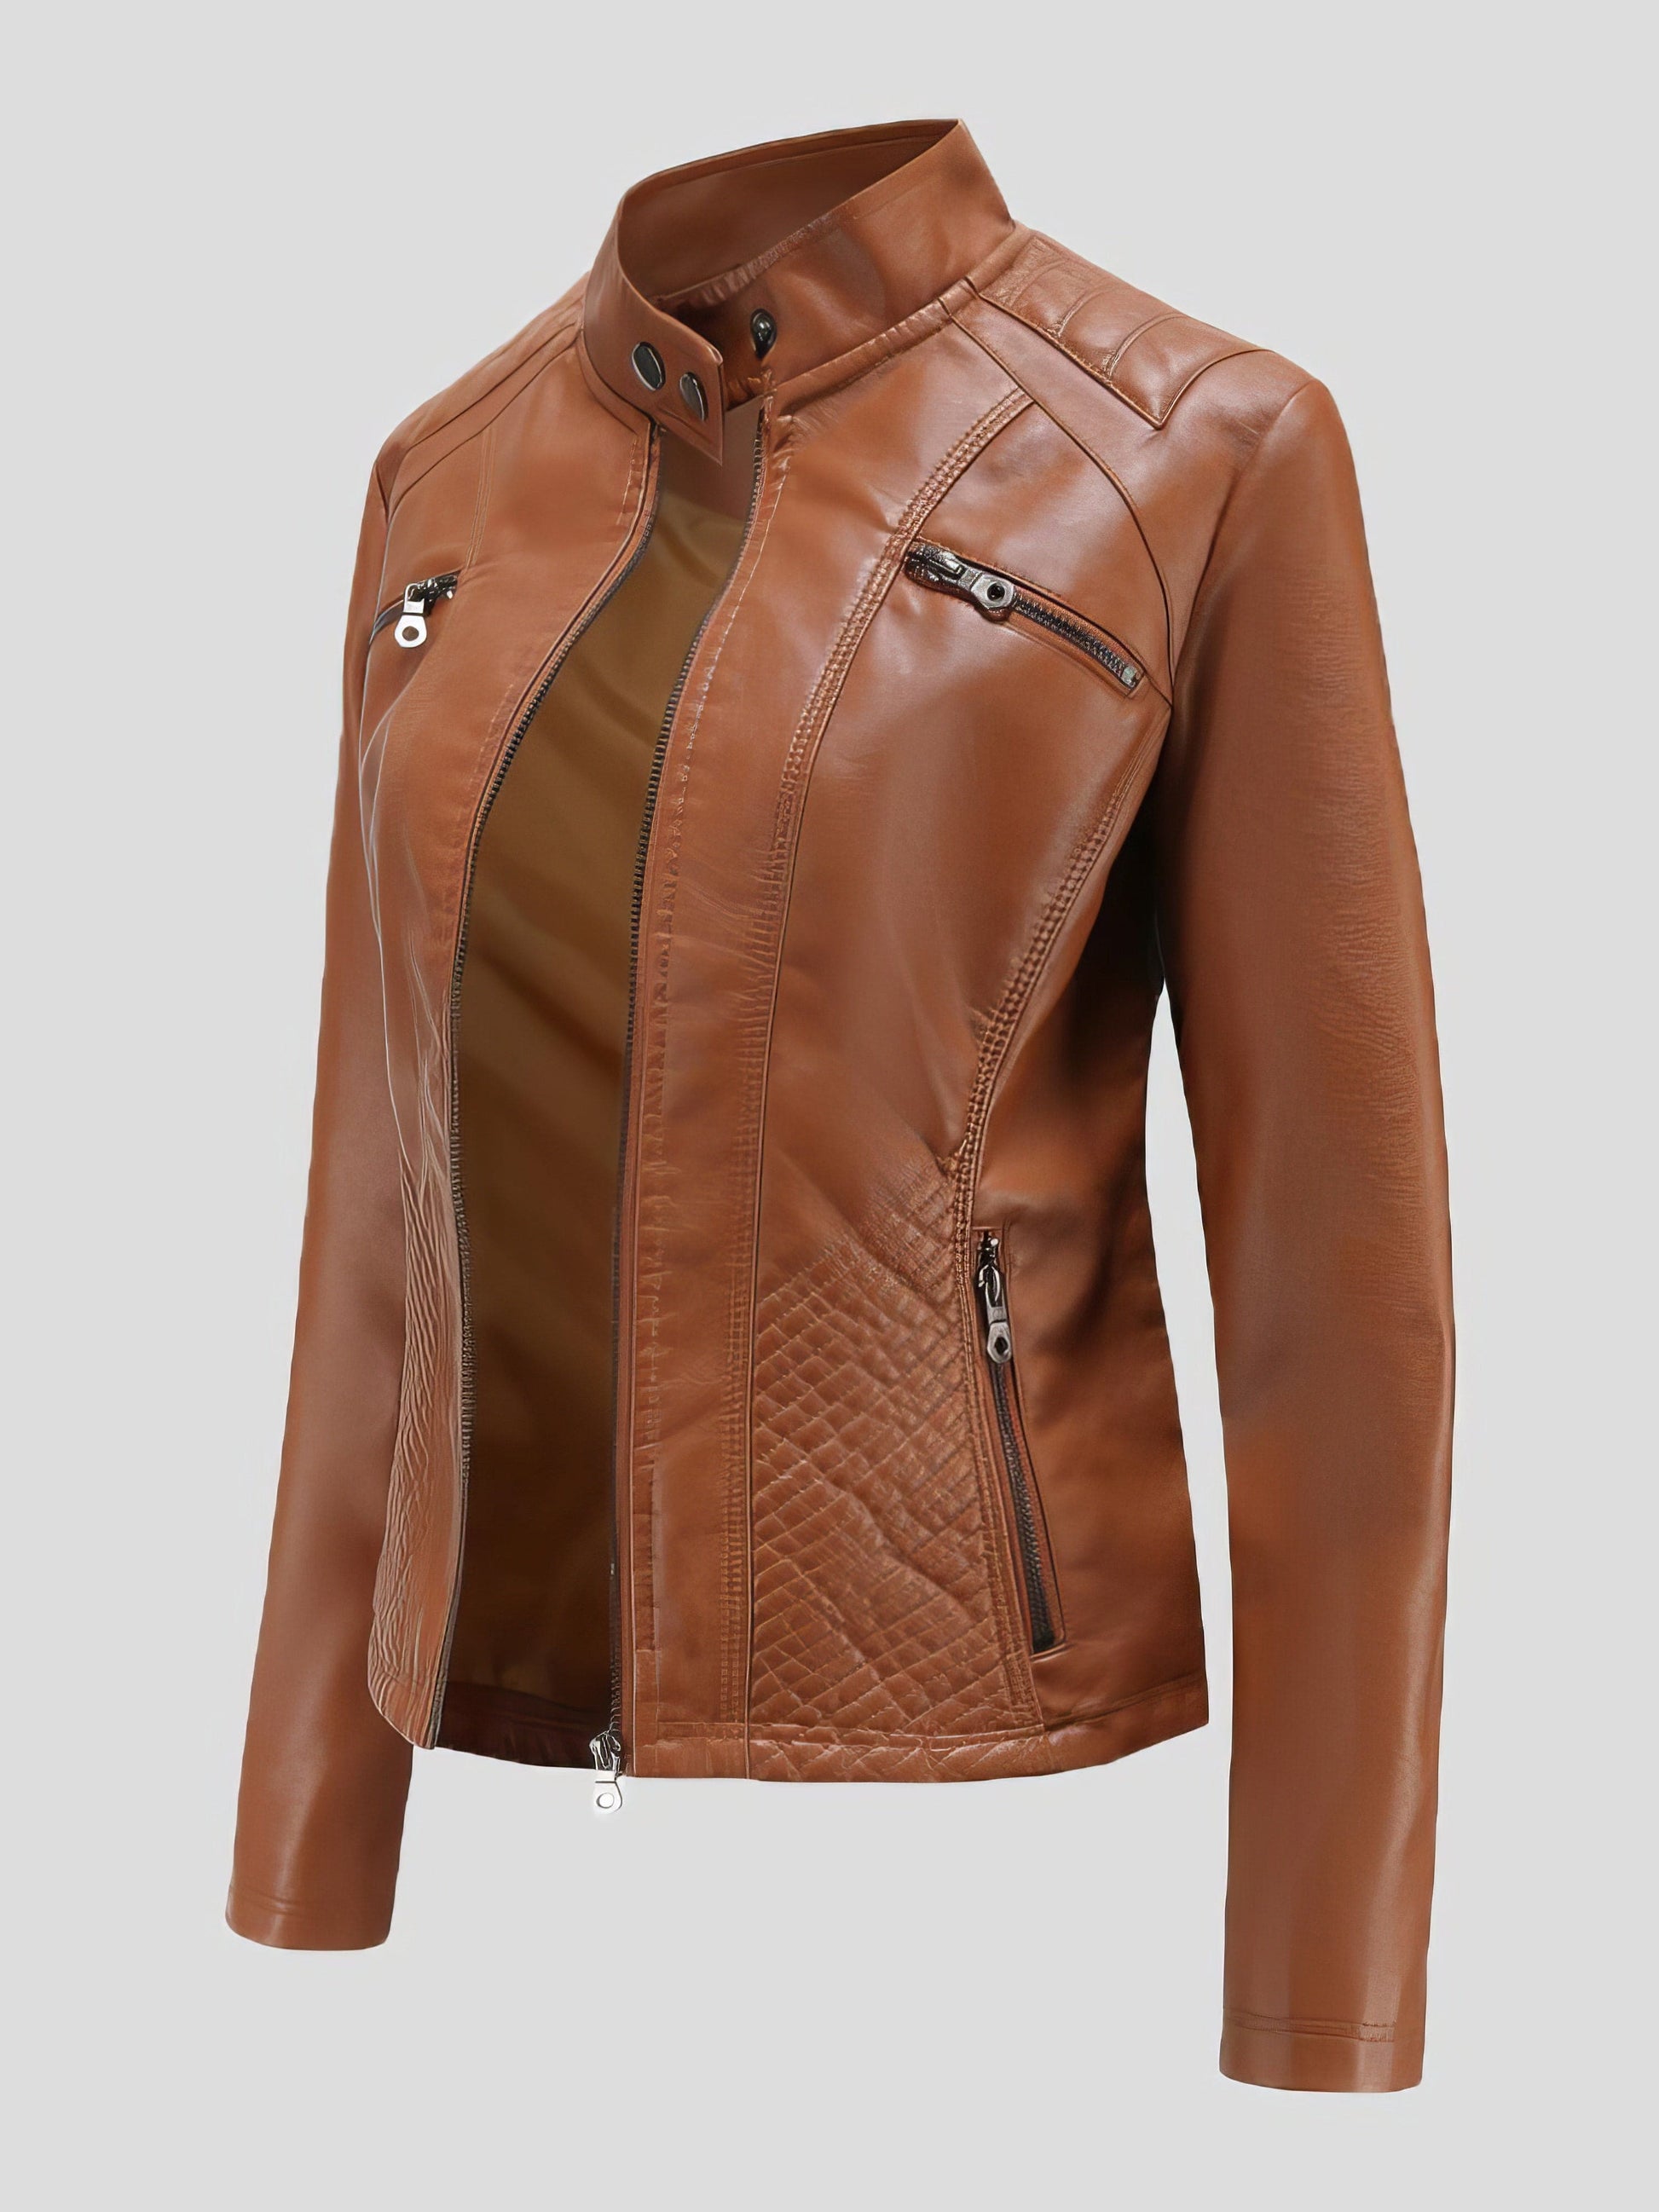 Casual Stand-Collar Slim Solid Leather Jacket